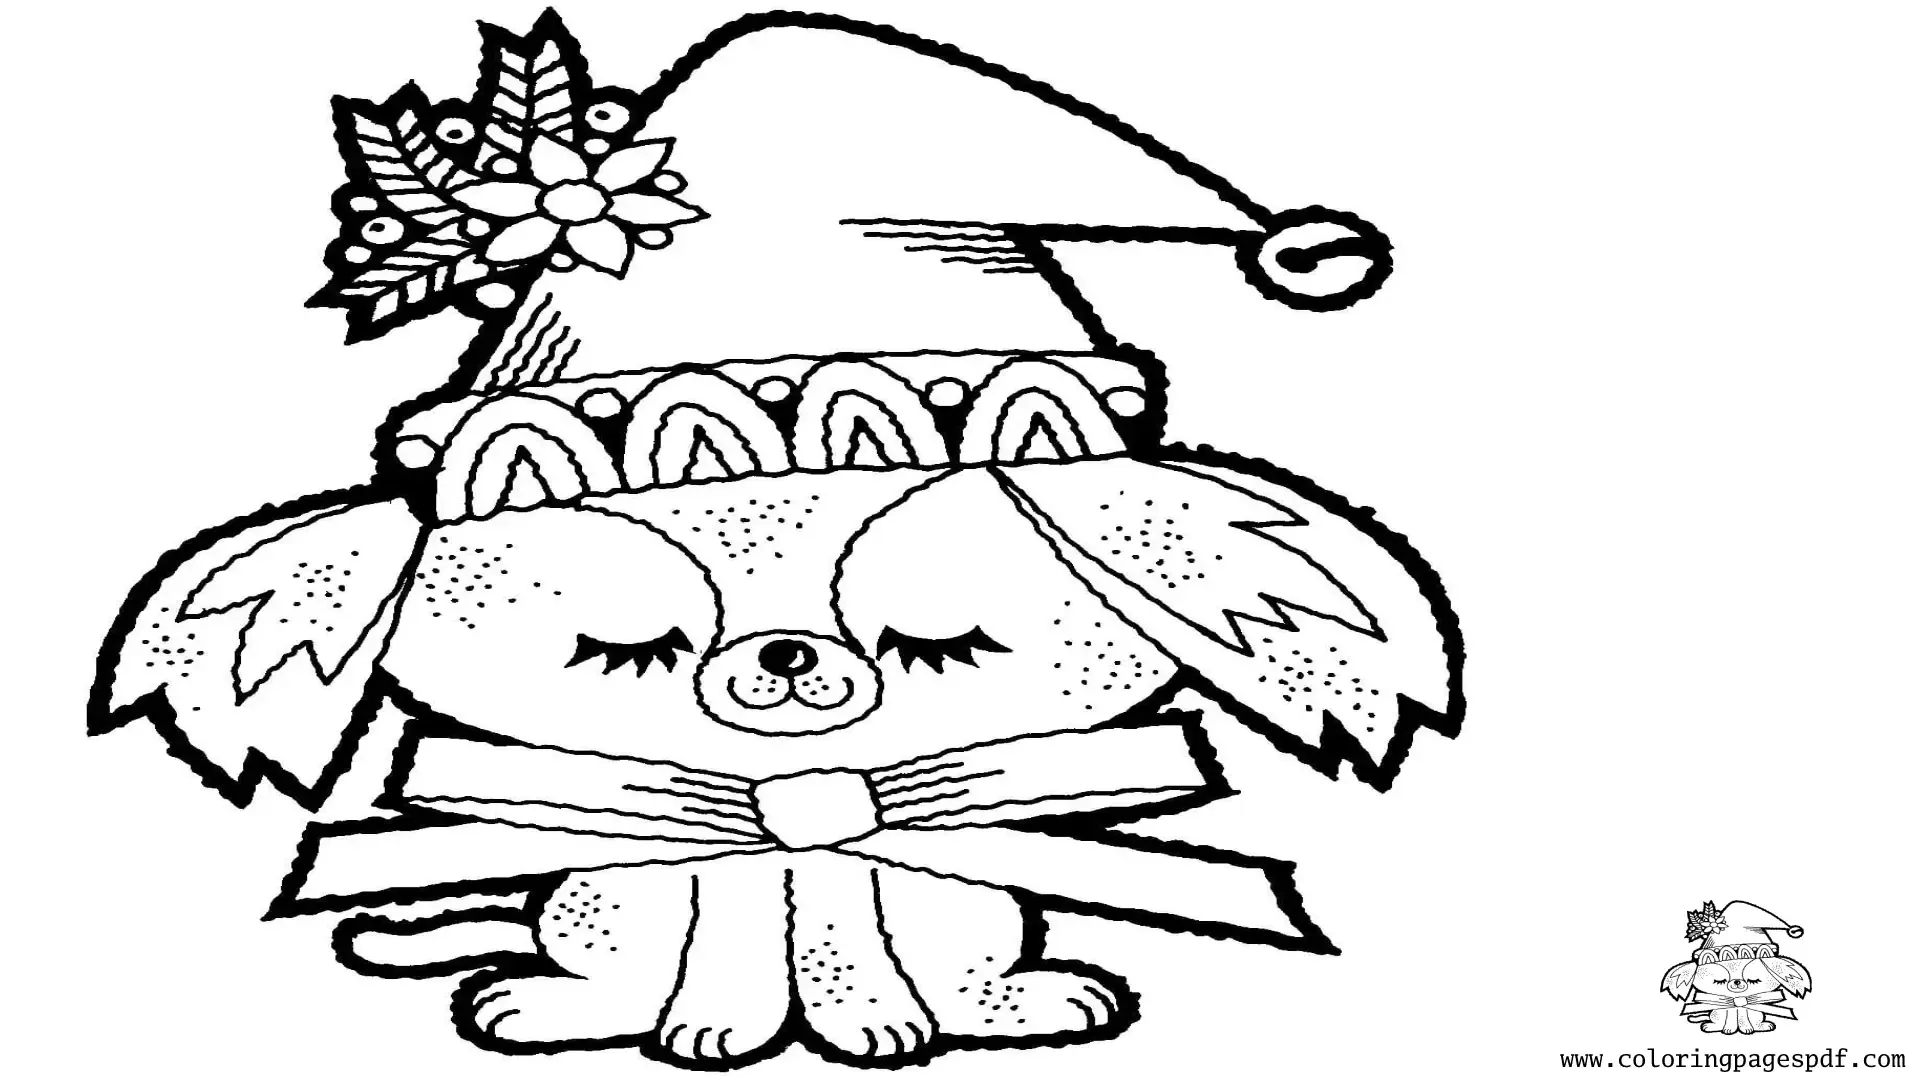 Coloring Page Of A Puppy With A Christmas Outfit